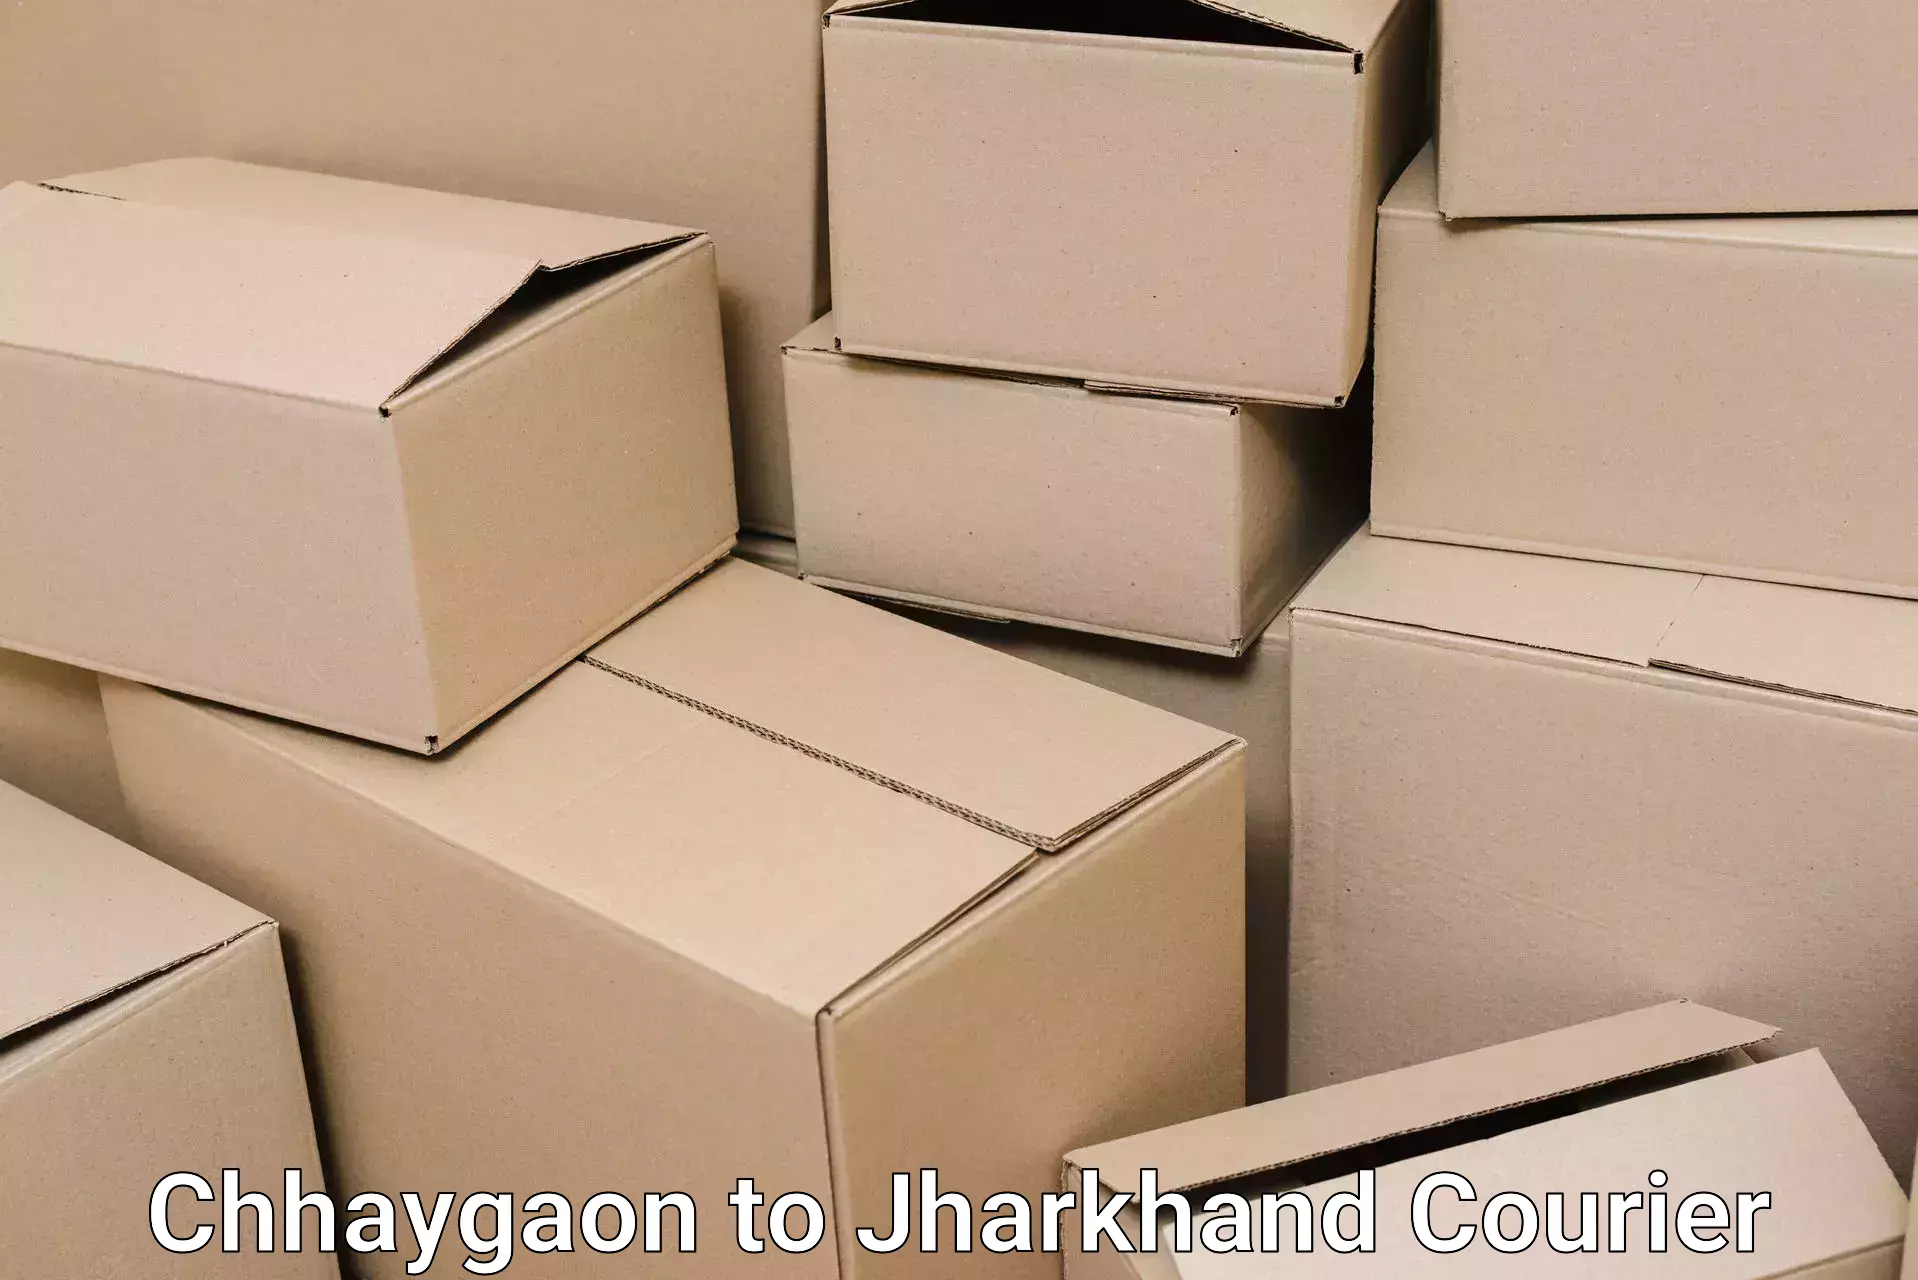 Professional packing services in Chhaygaon to Koderma